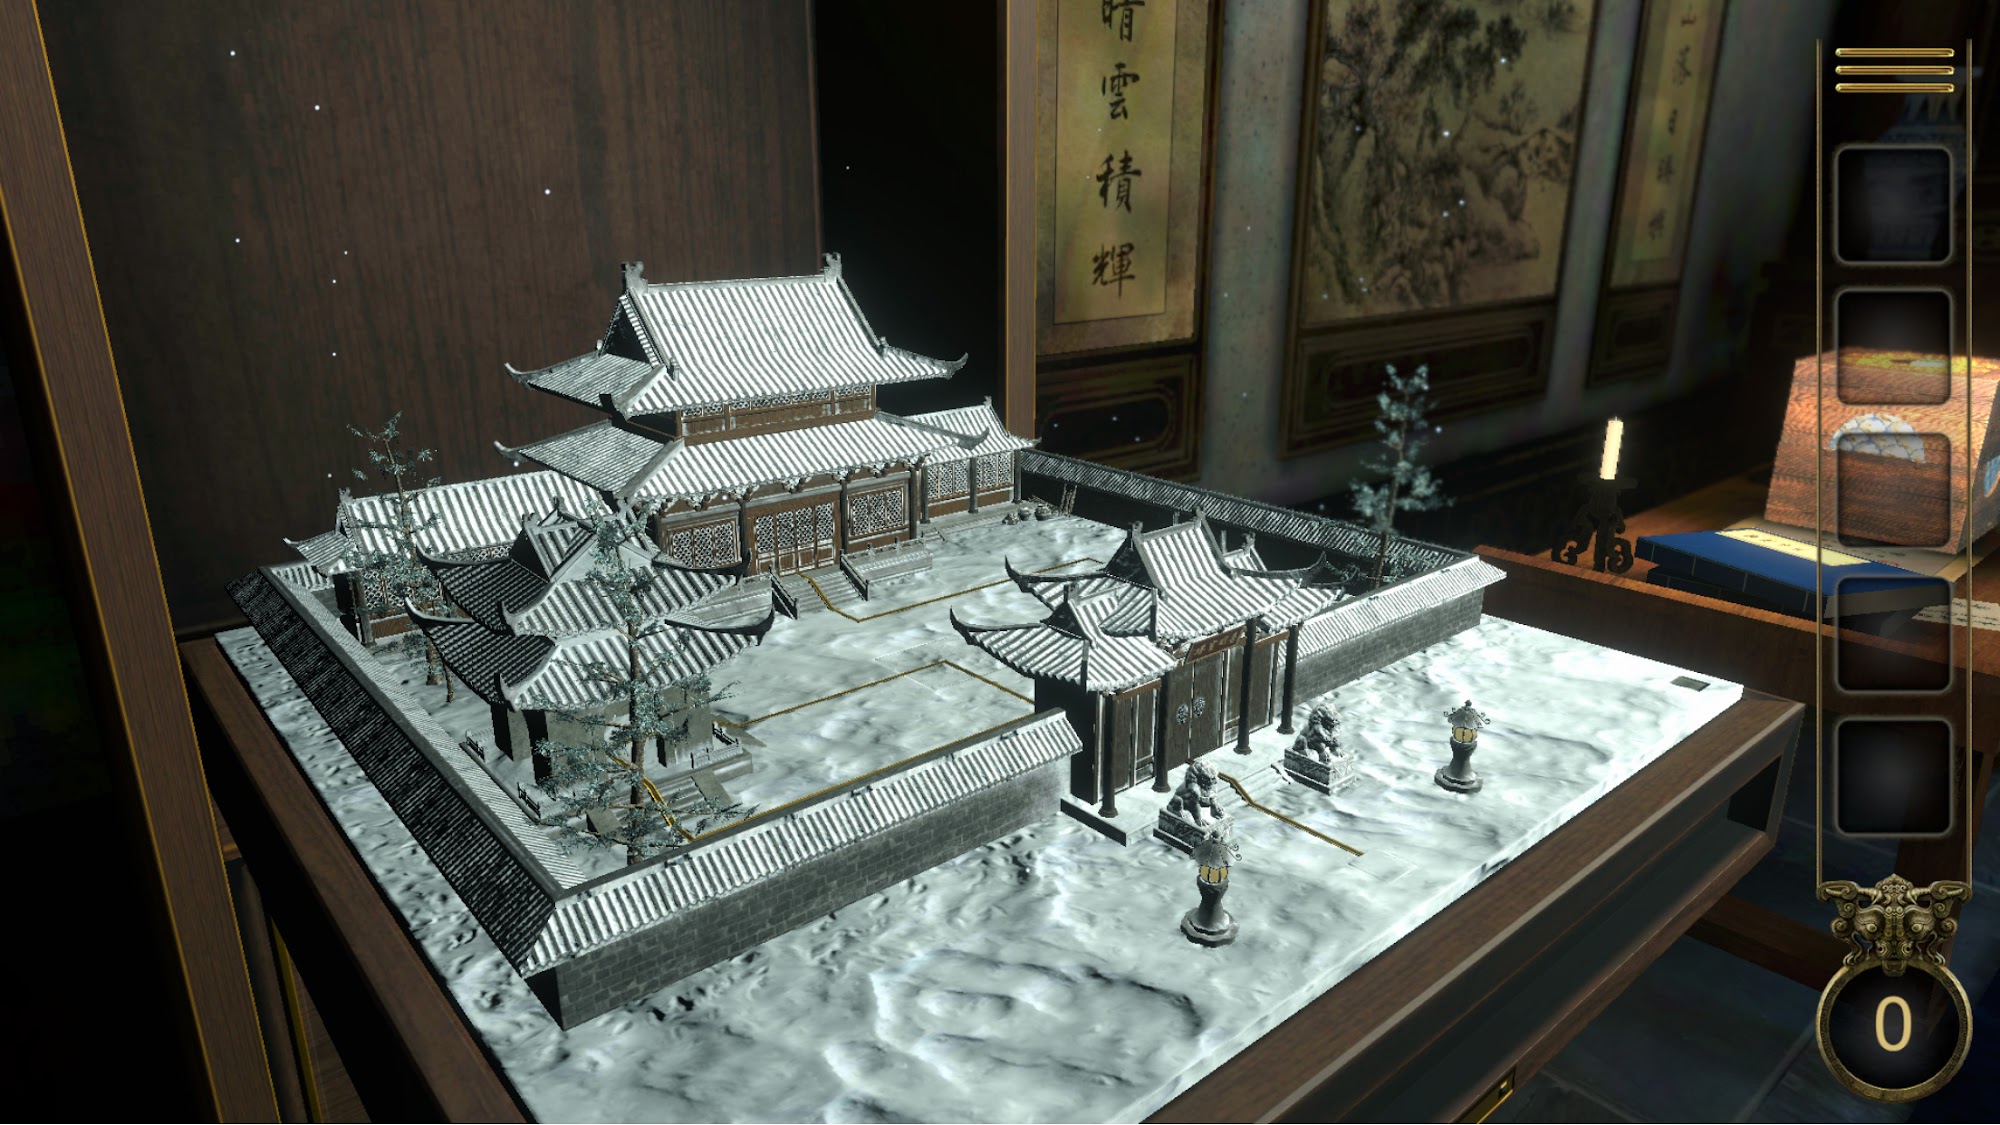 3D Escape game : Chinese Room for Android